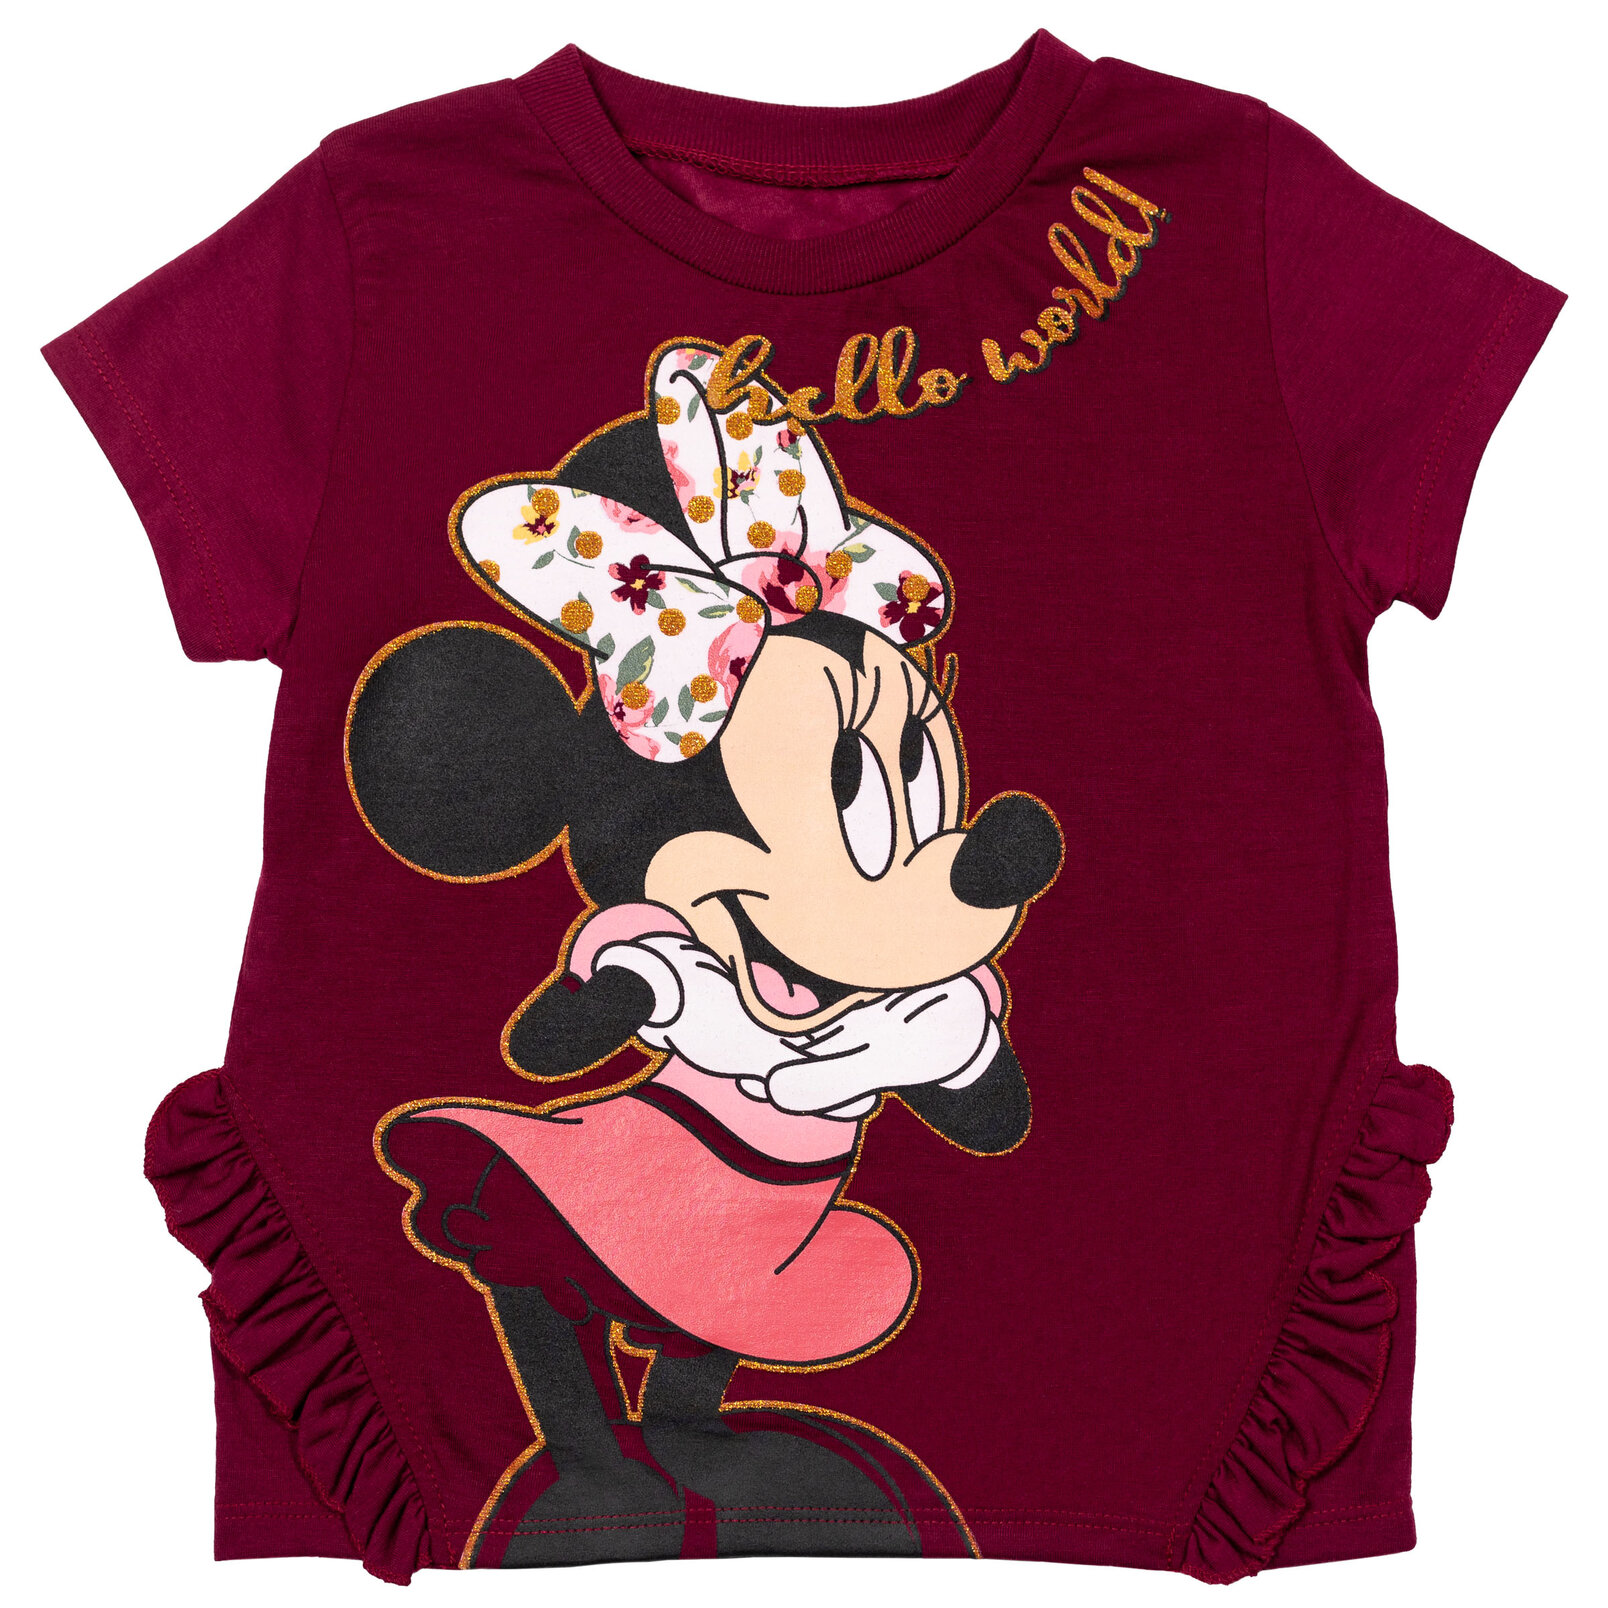 Disney Minnie Mouse Infant Baby Girls T-Shirt and Leggings Outfit Set Infant to Little Kid - image 4 of 5